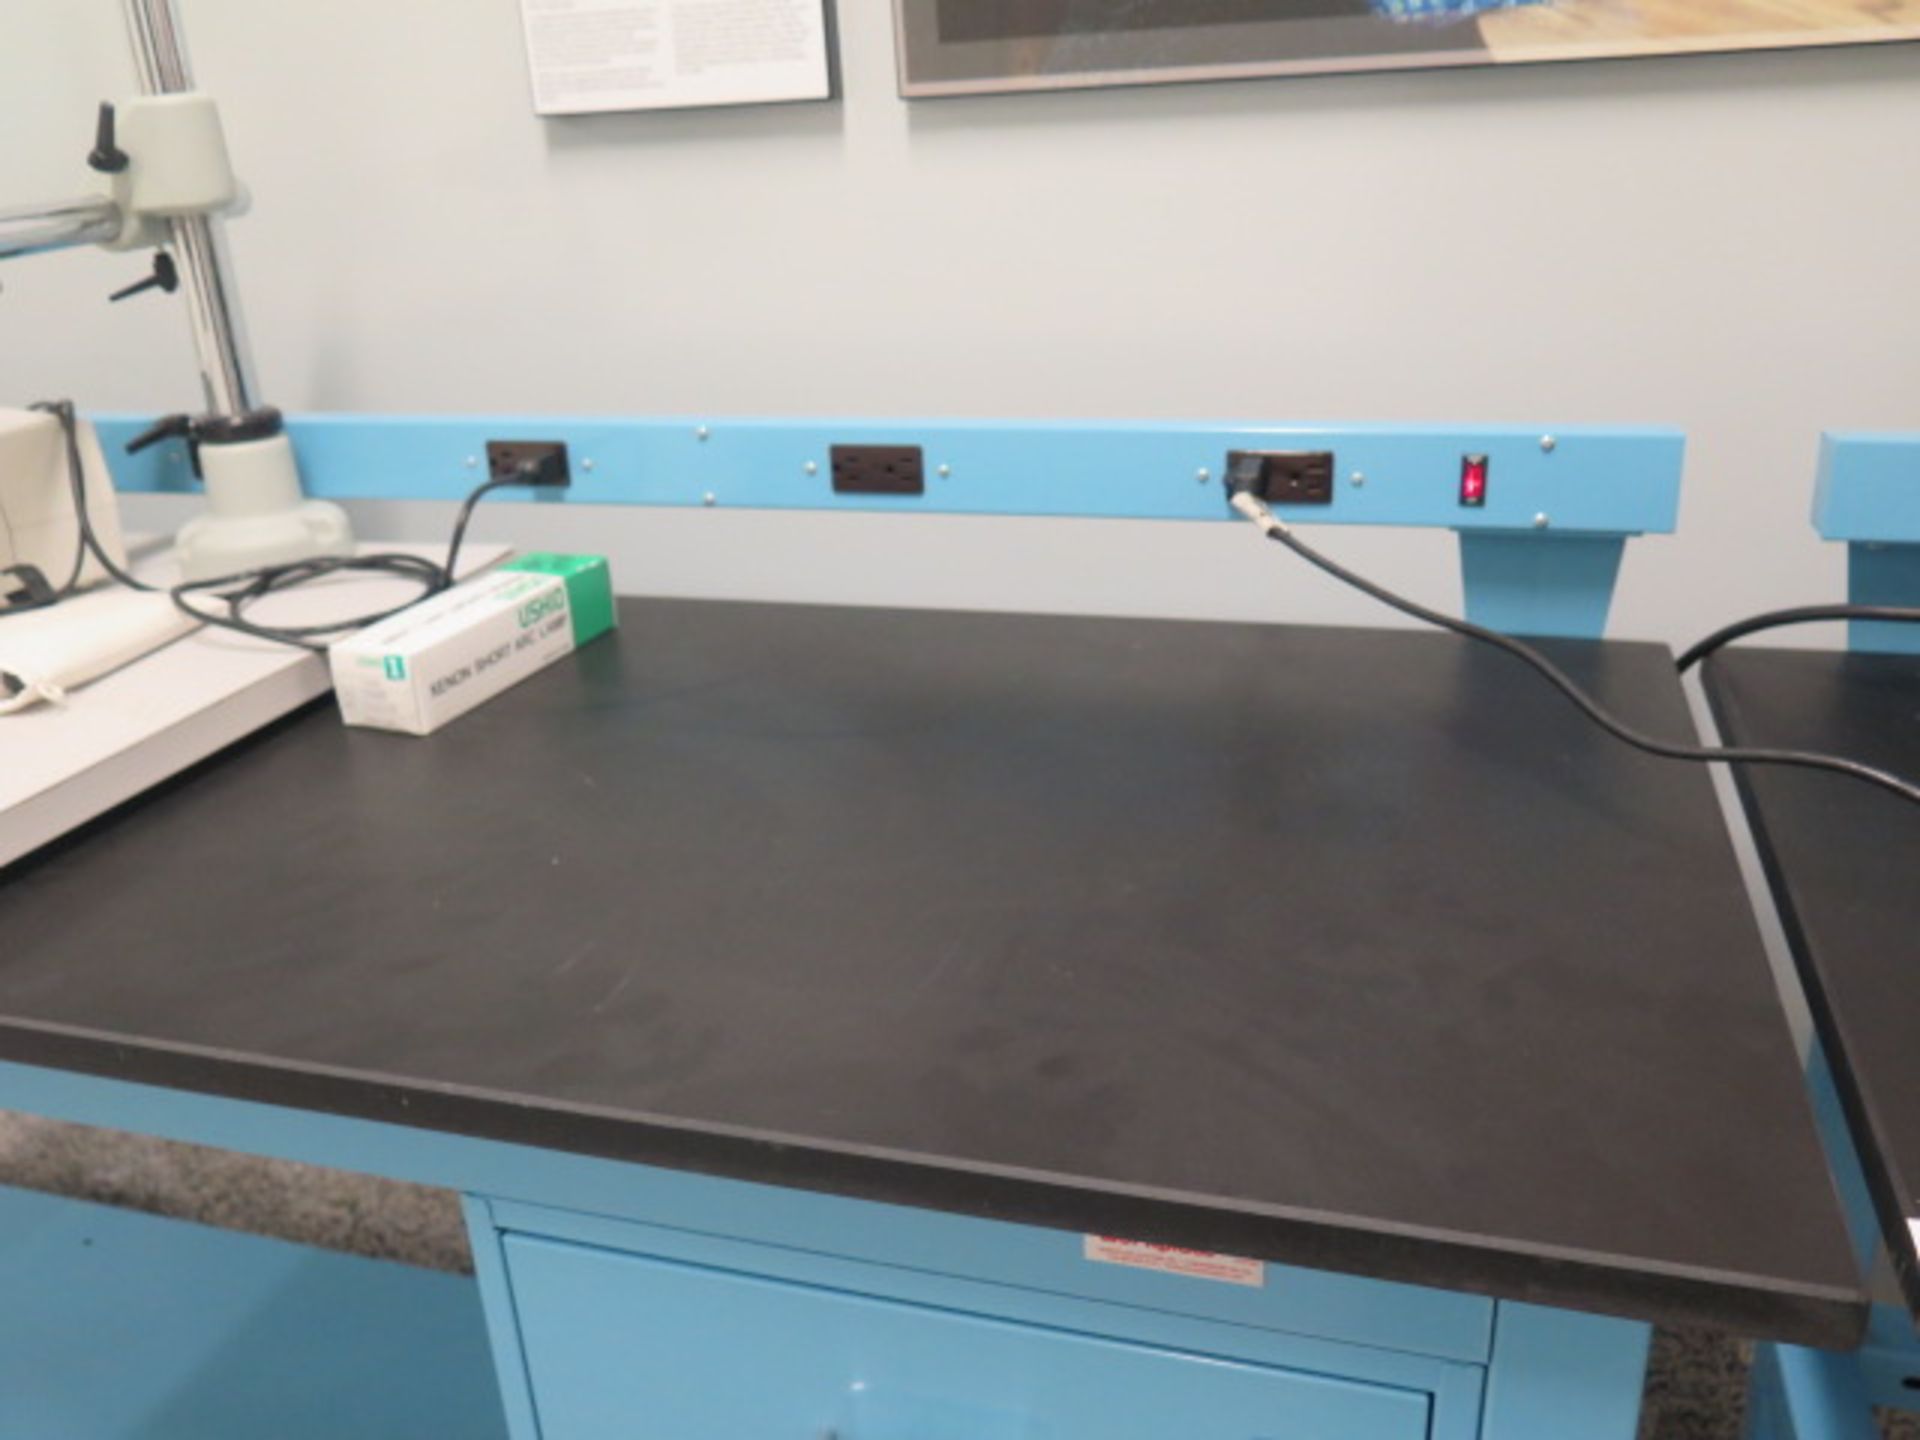 Workplace Modular Bench Systems 24" x 72" Rolling Lab Bench w/ Acid Proof Top | Loading Price: $25 - Image 3 of 4